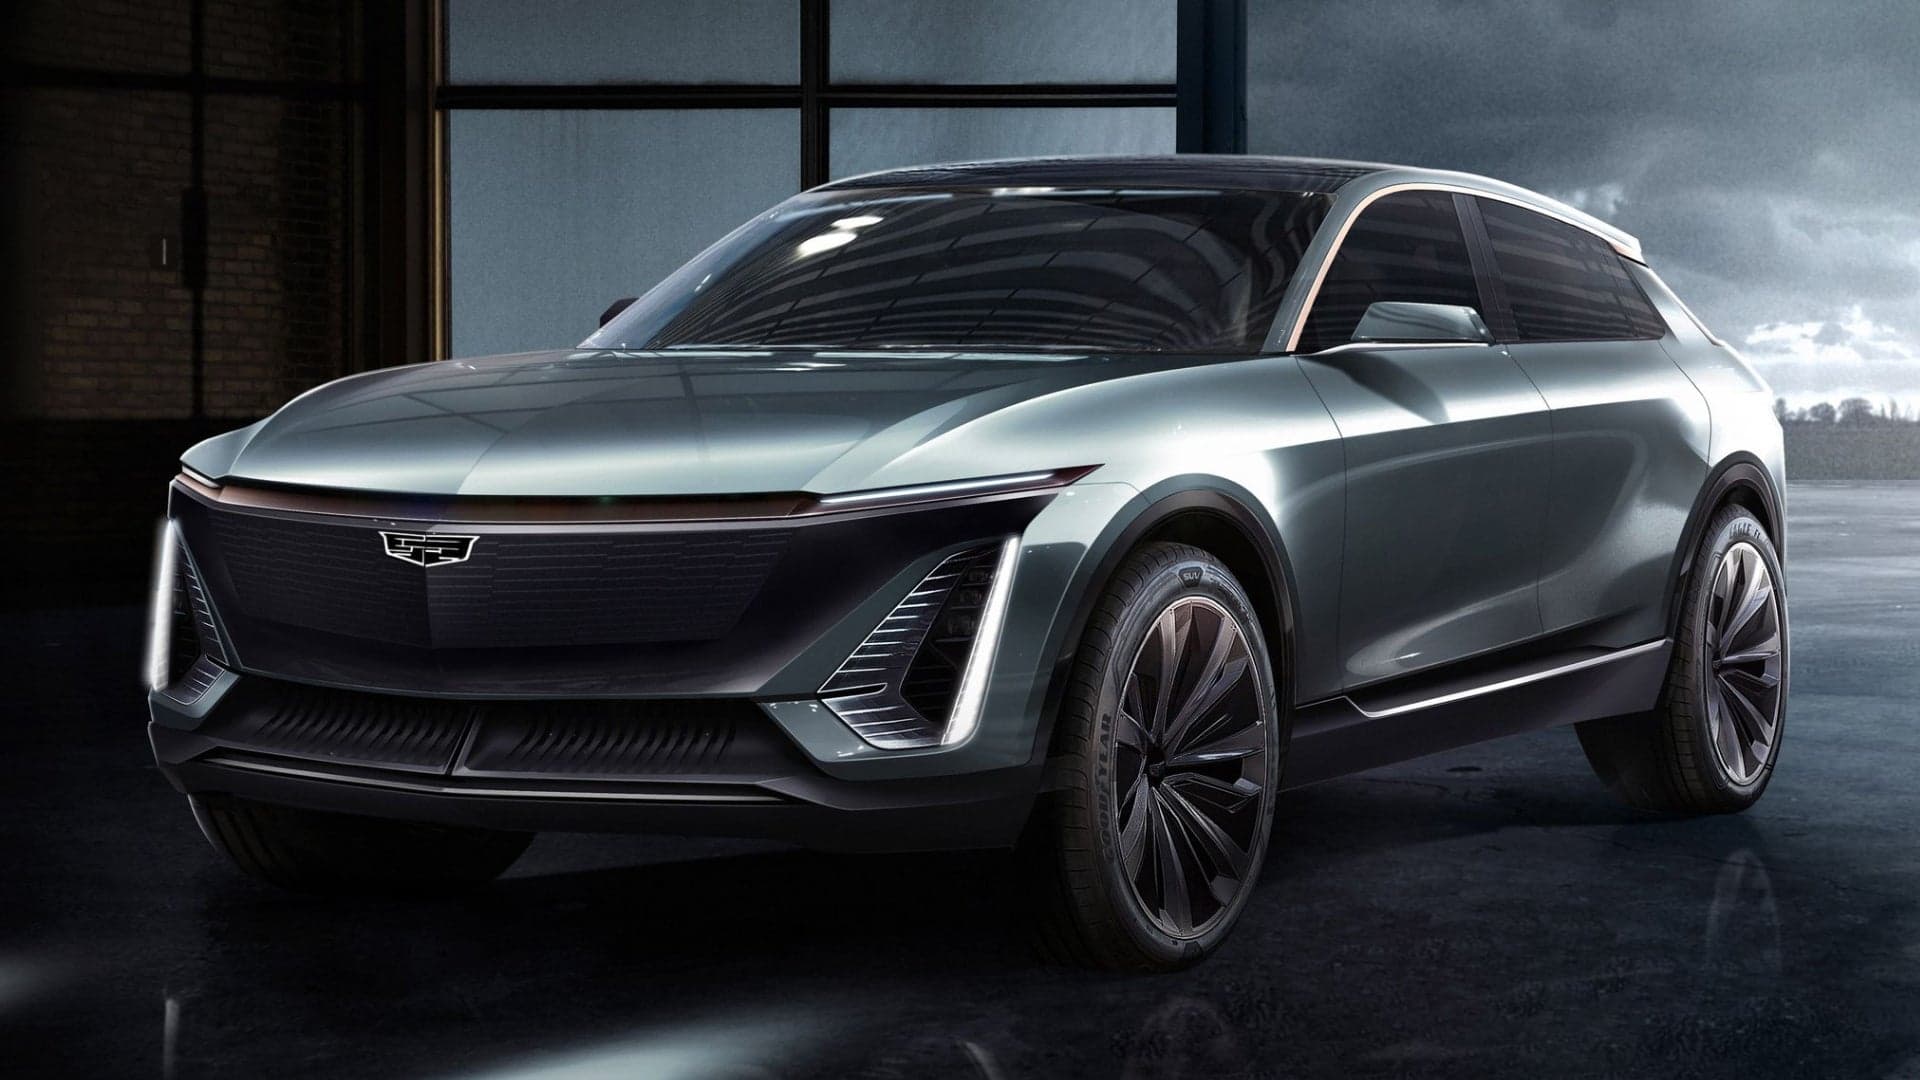 Here’s Our Best Look Yet at the Cadillac Lyriq Electric SUV